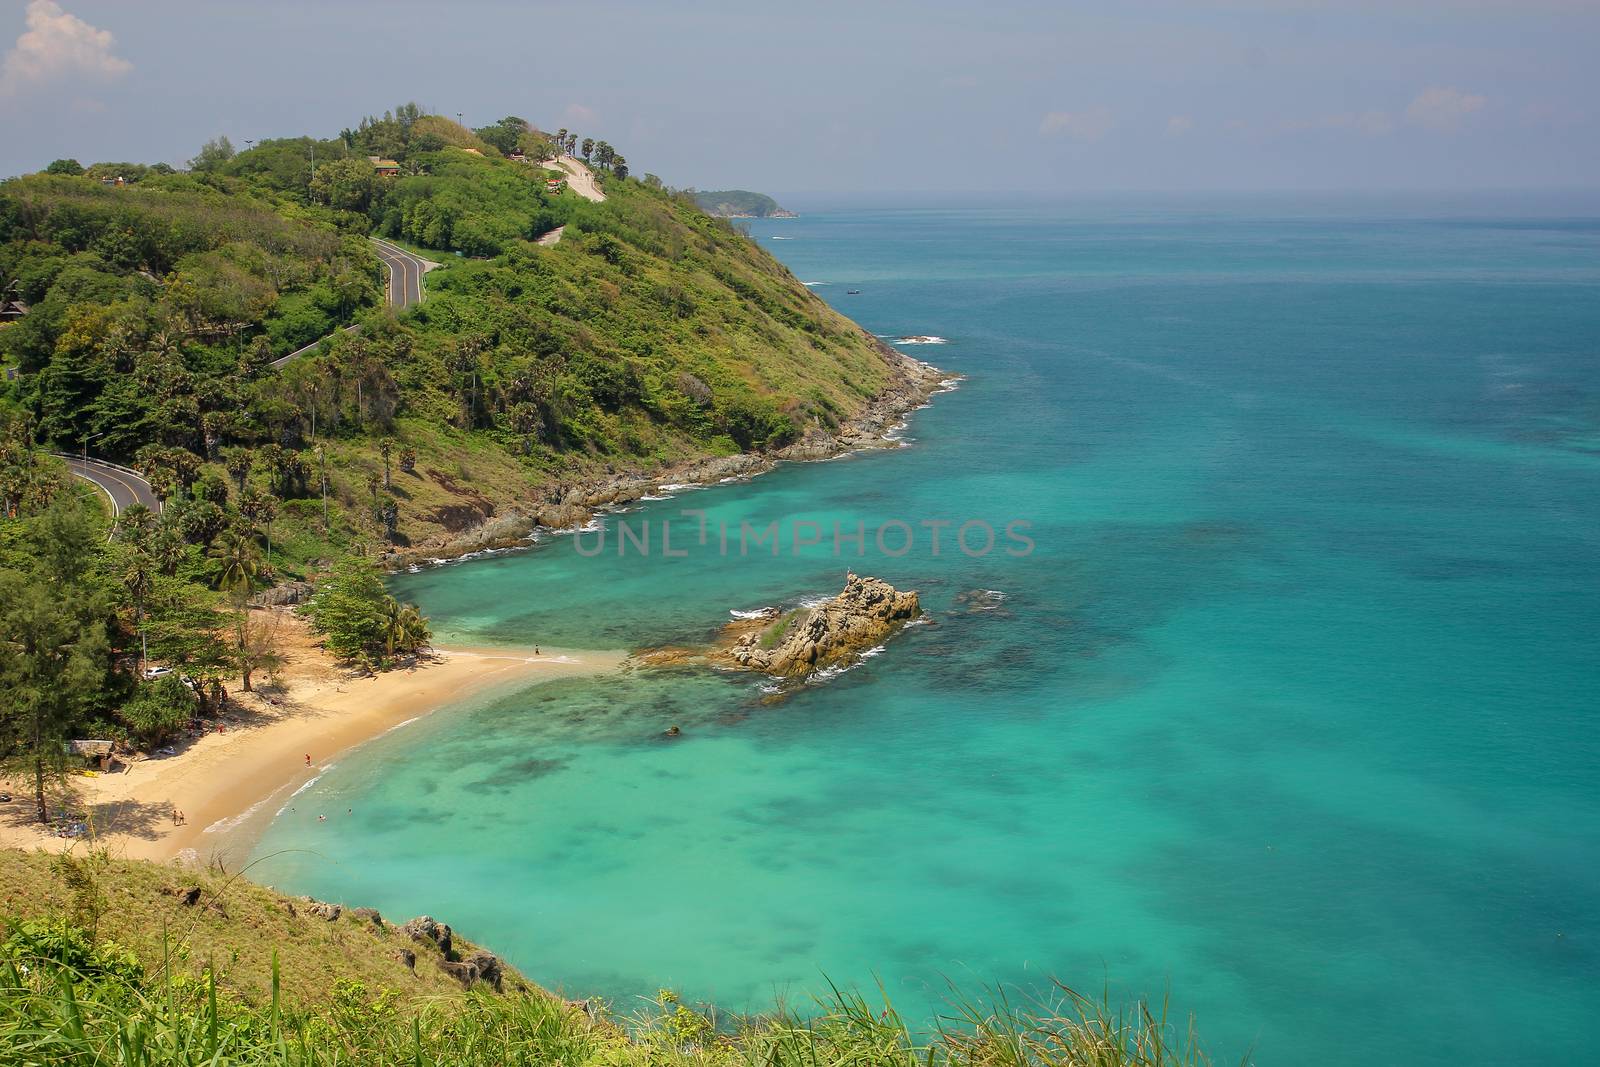 Tropical sea scenery on viewpoint phuket thailand by pumppump